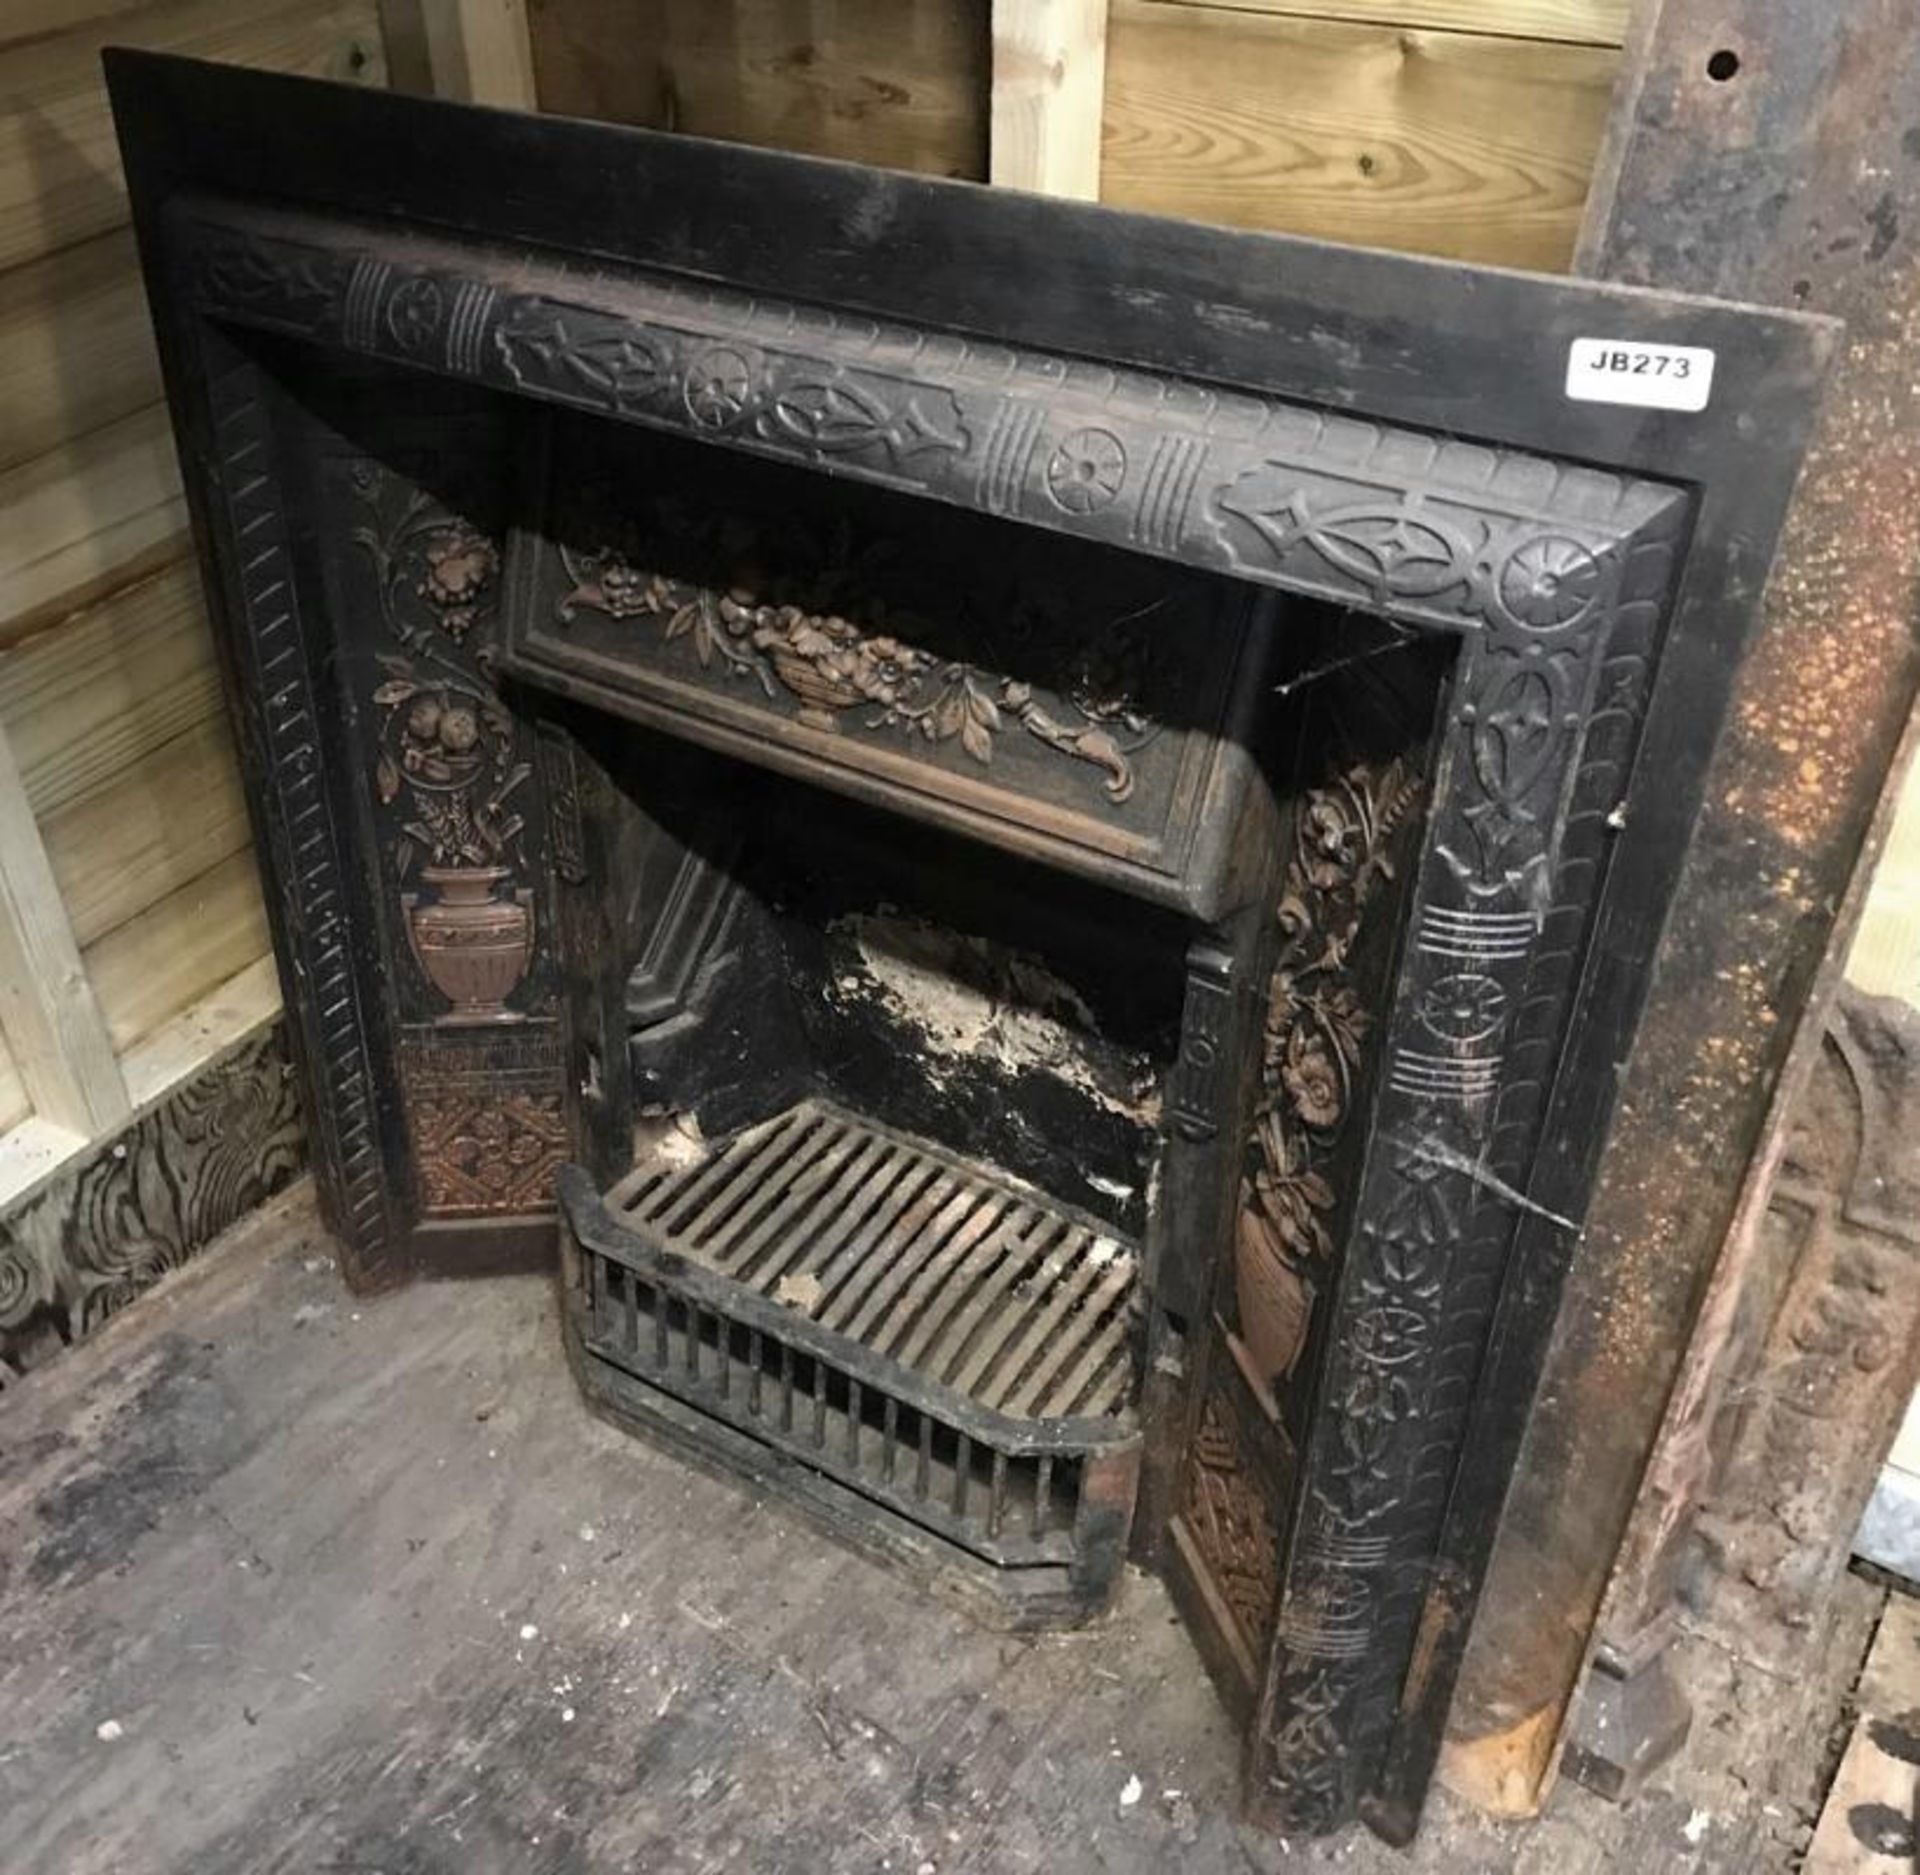 1 x Ultra Rare Stunning Antique Victorian Cast Iron Fire Insert With Ornate Cast Iron Tiles To Side